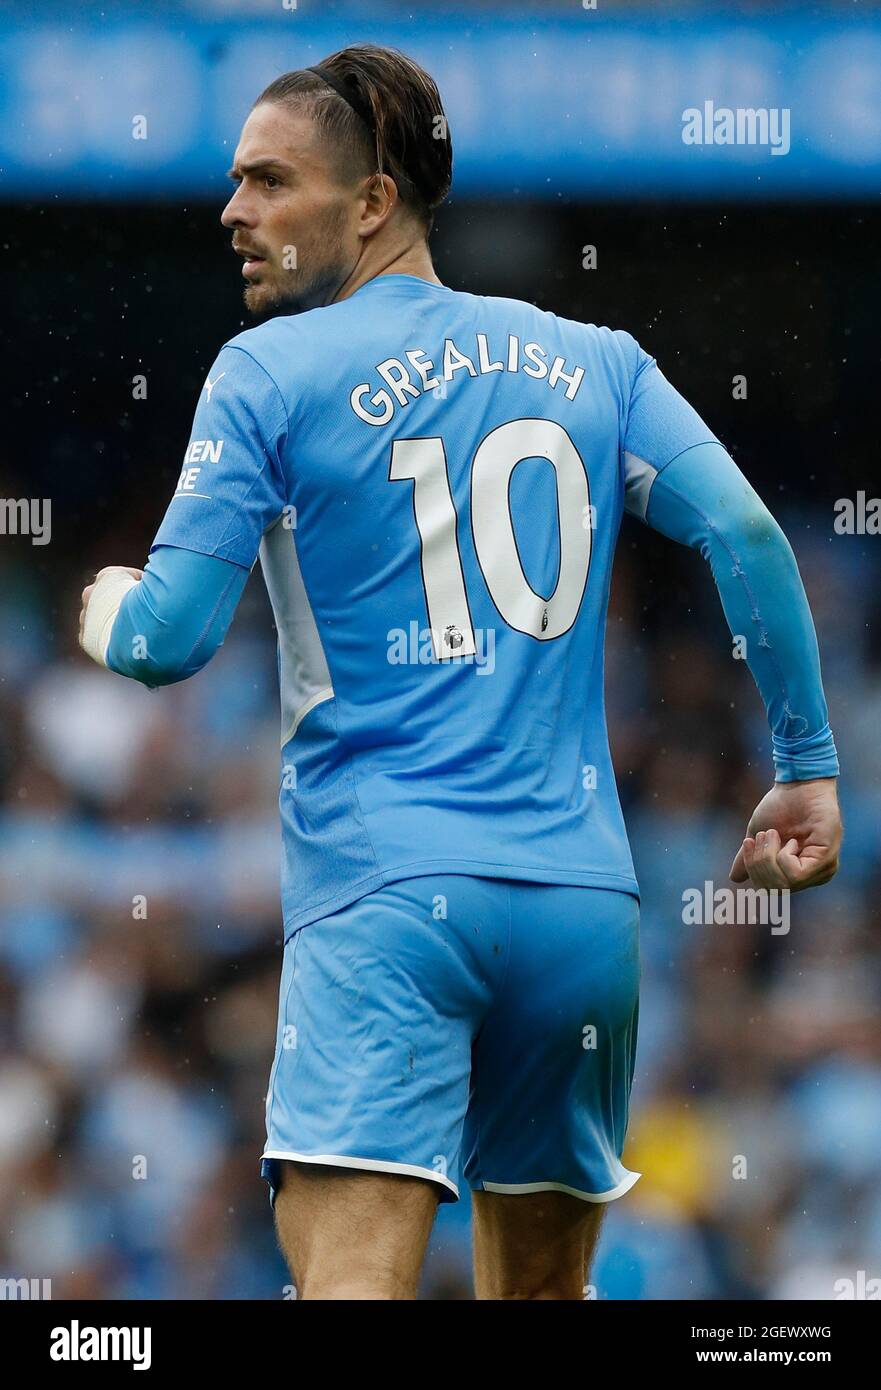 Manchester, England, 21st August 2021.  Jack Grealish of Manchester City during the Premier League match at the Etihad Stadium, Manchester. Picture credit should read: Darren Staples / Sportimage Stock Photo